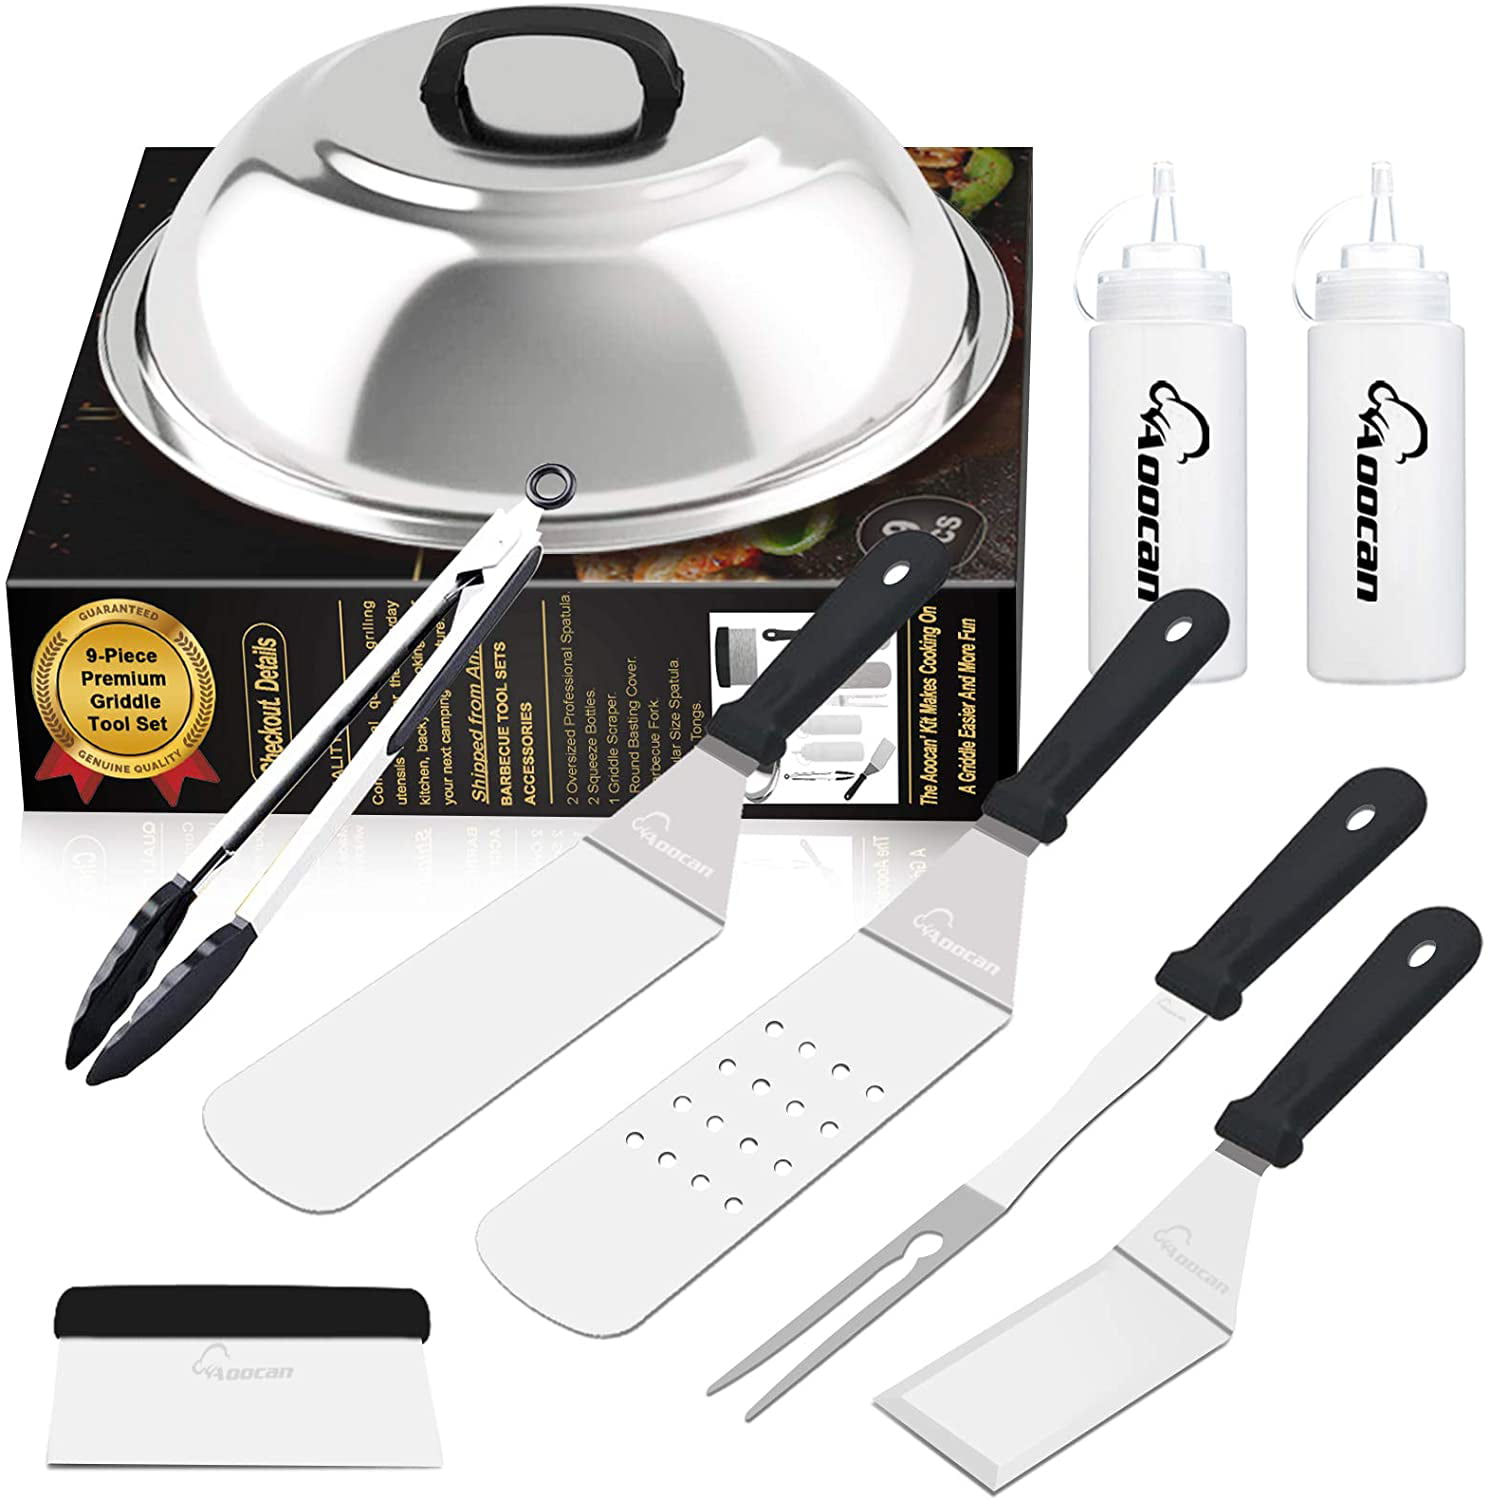 Heavy Duty Blackstone Griddle Professional Accessories Kit Outdoor Grilling BBQ 